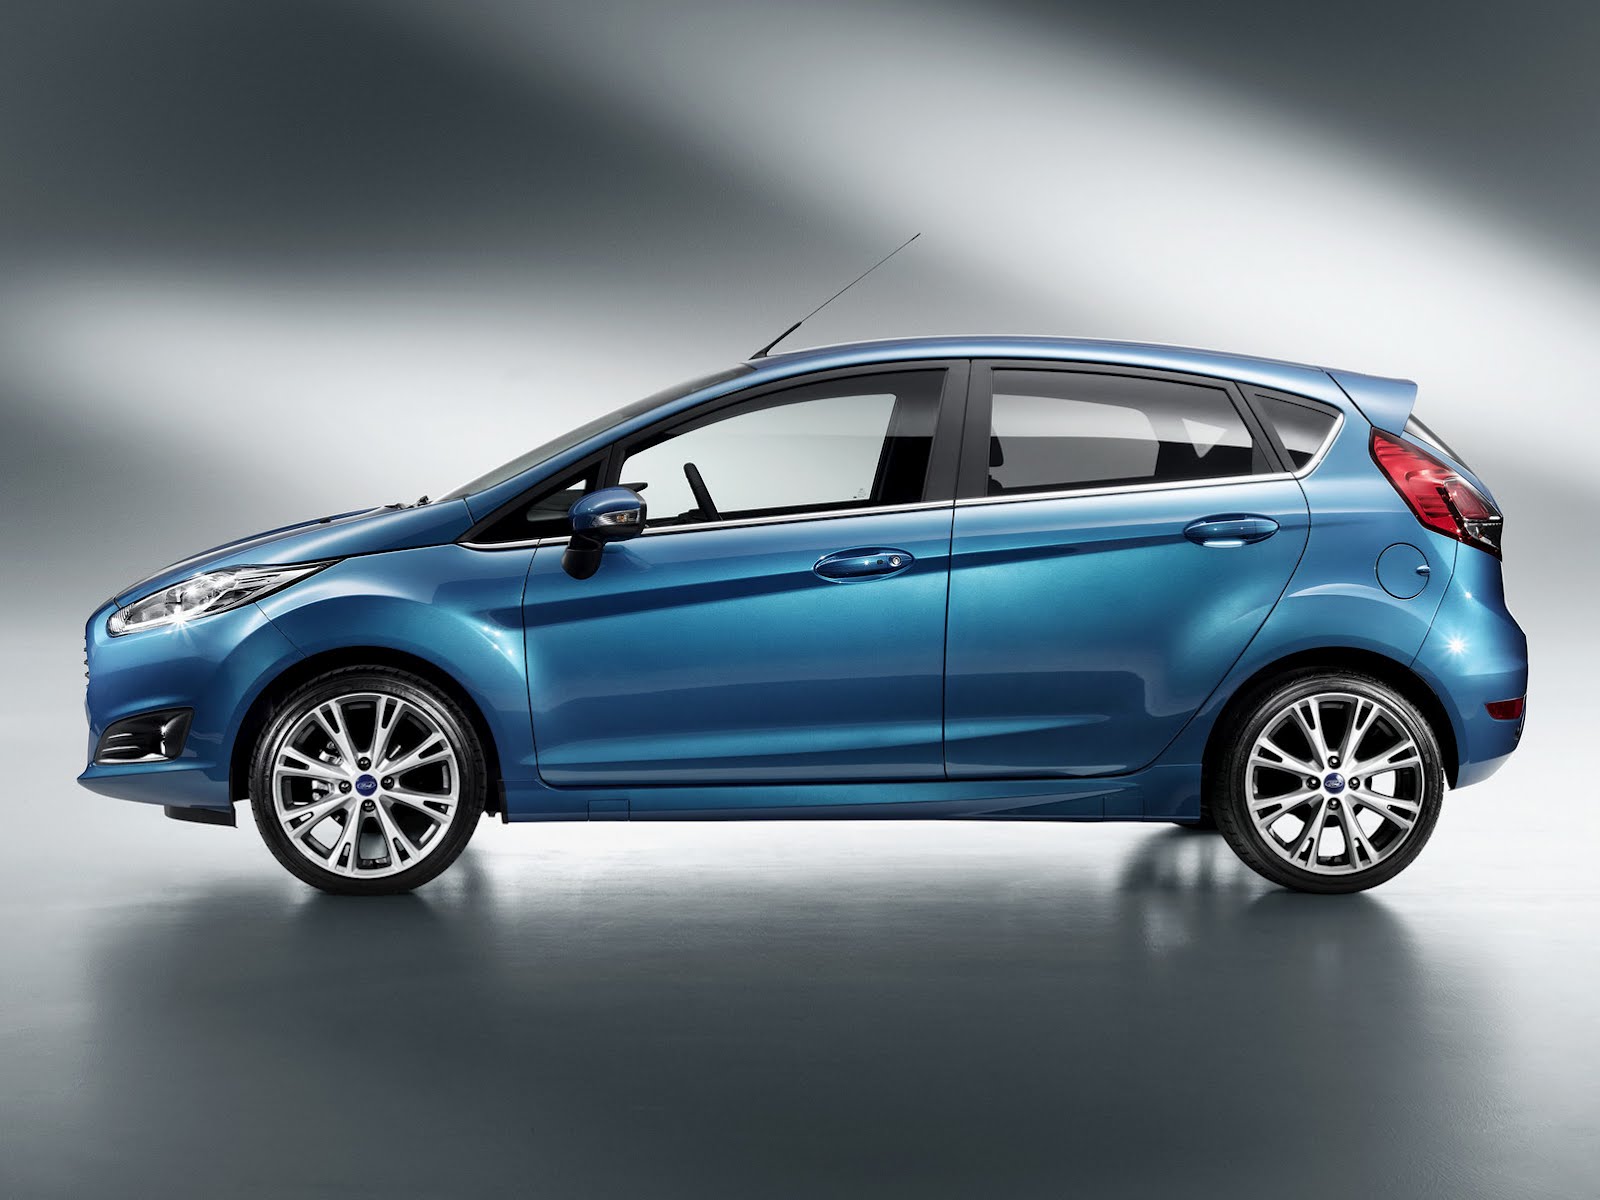 Ford Fiesta image #8